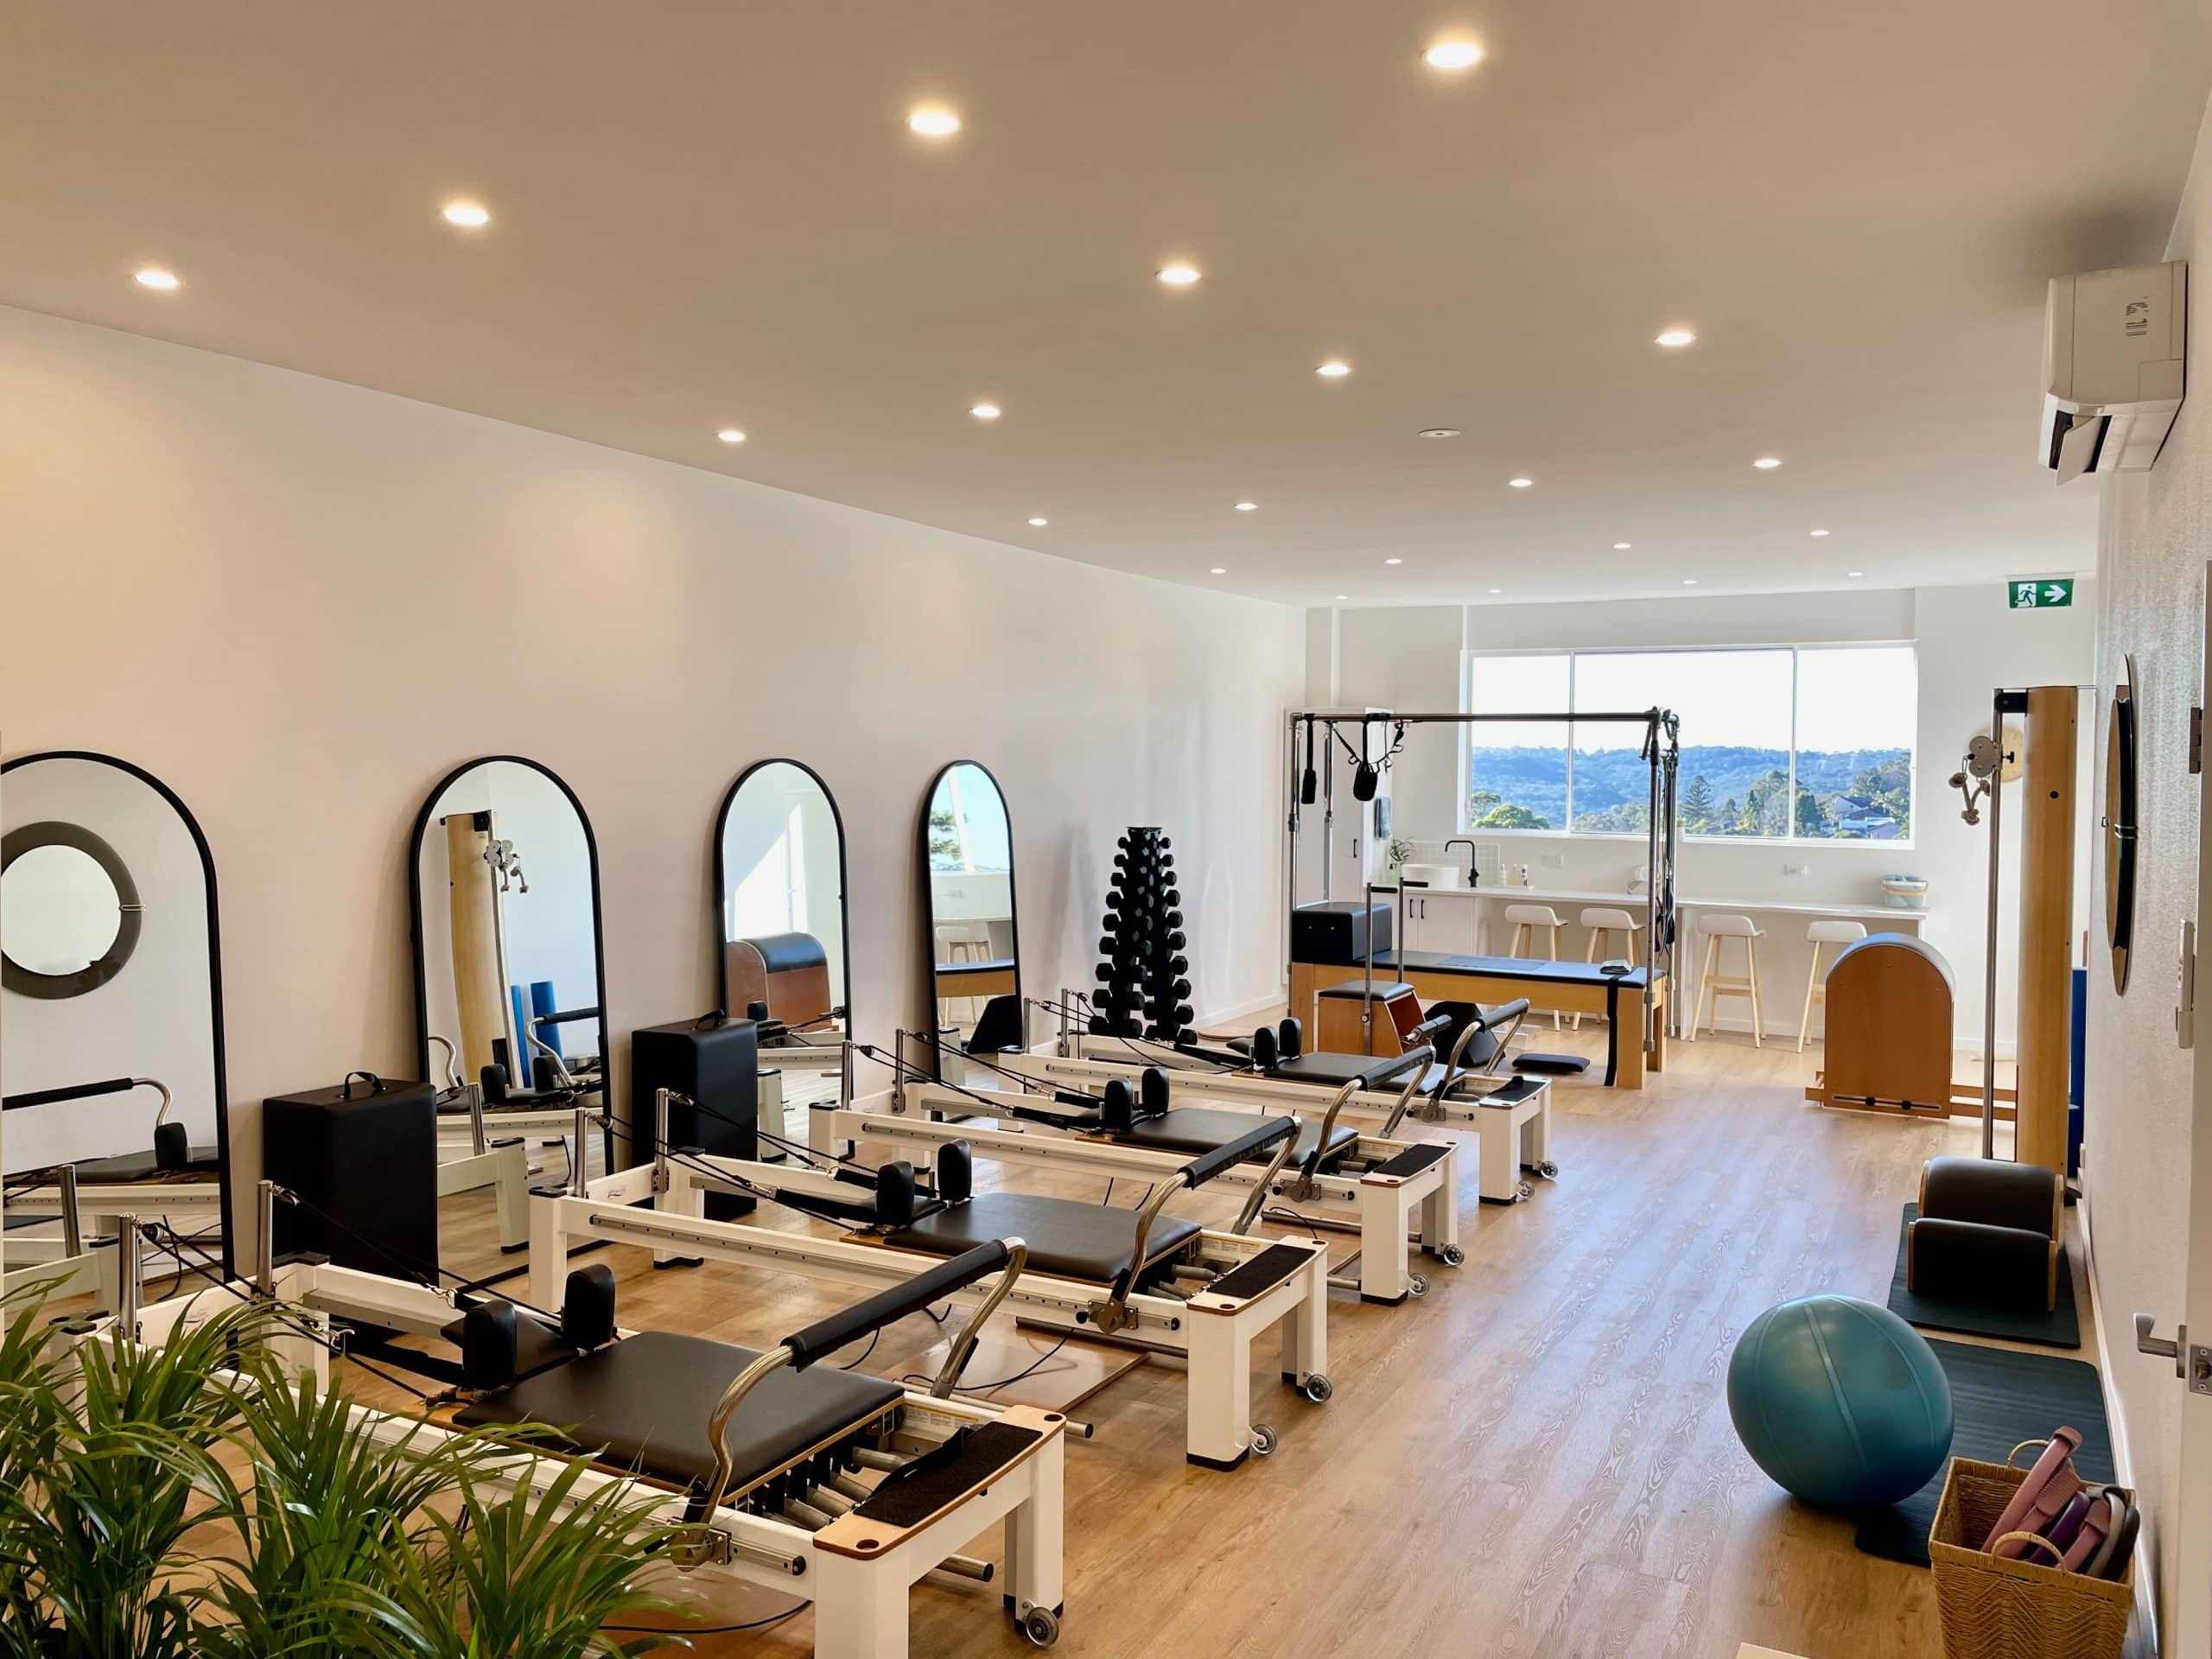 st ives pilates studio at clinical physio